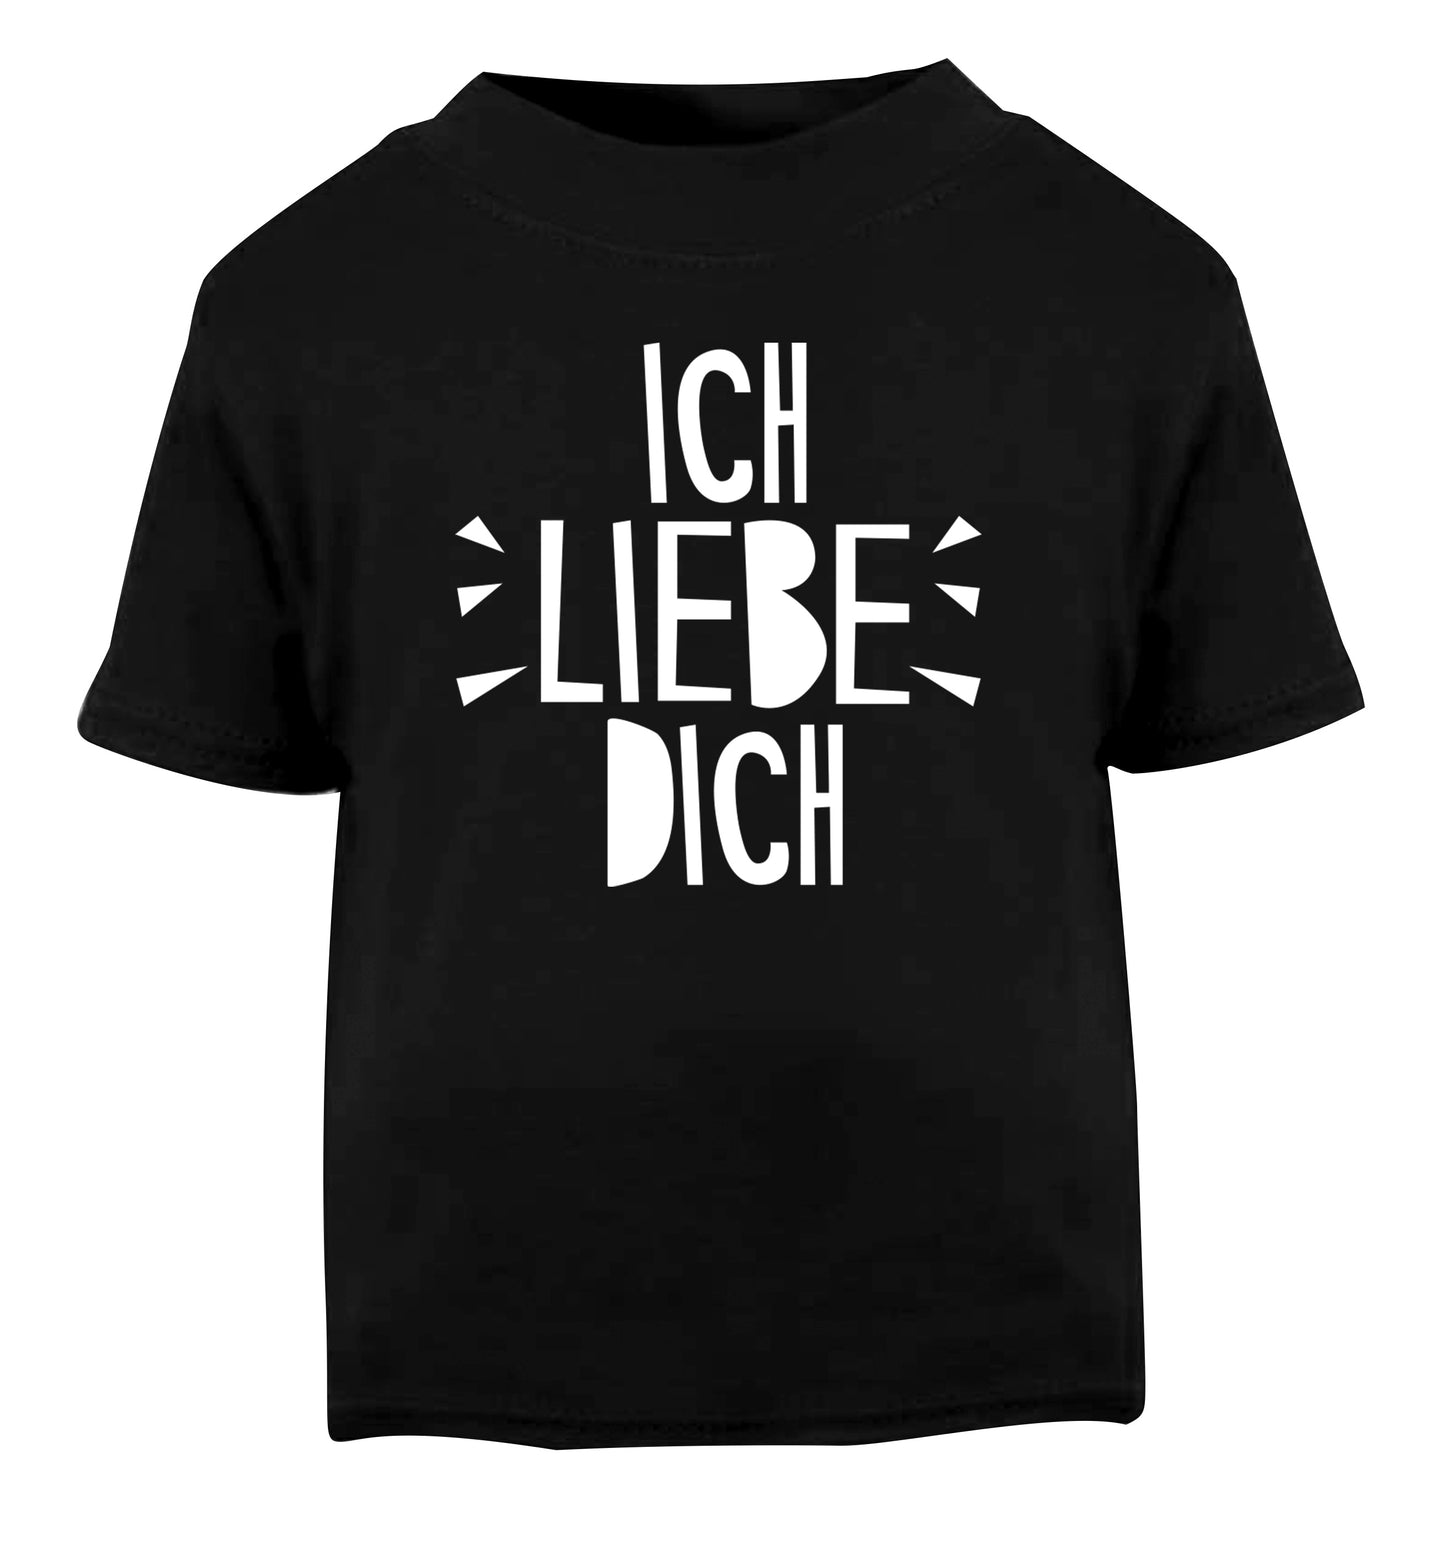 Ich liebe dich - I love you Black Baby Toddler Tshirt 2 years